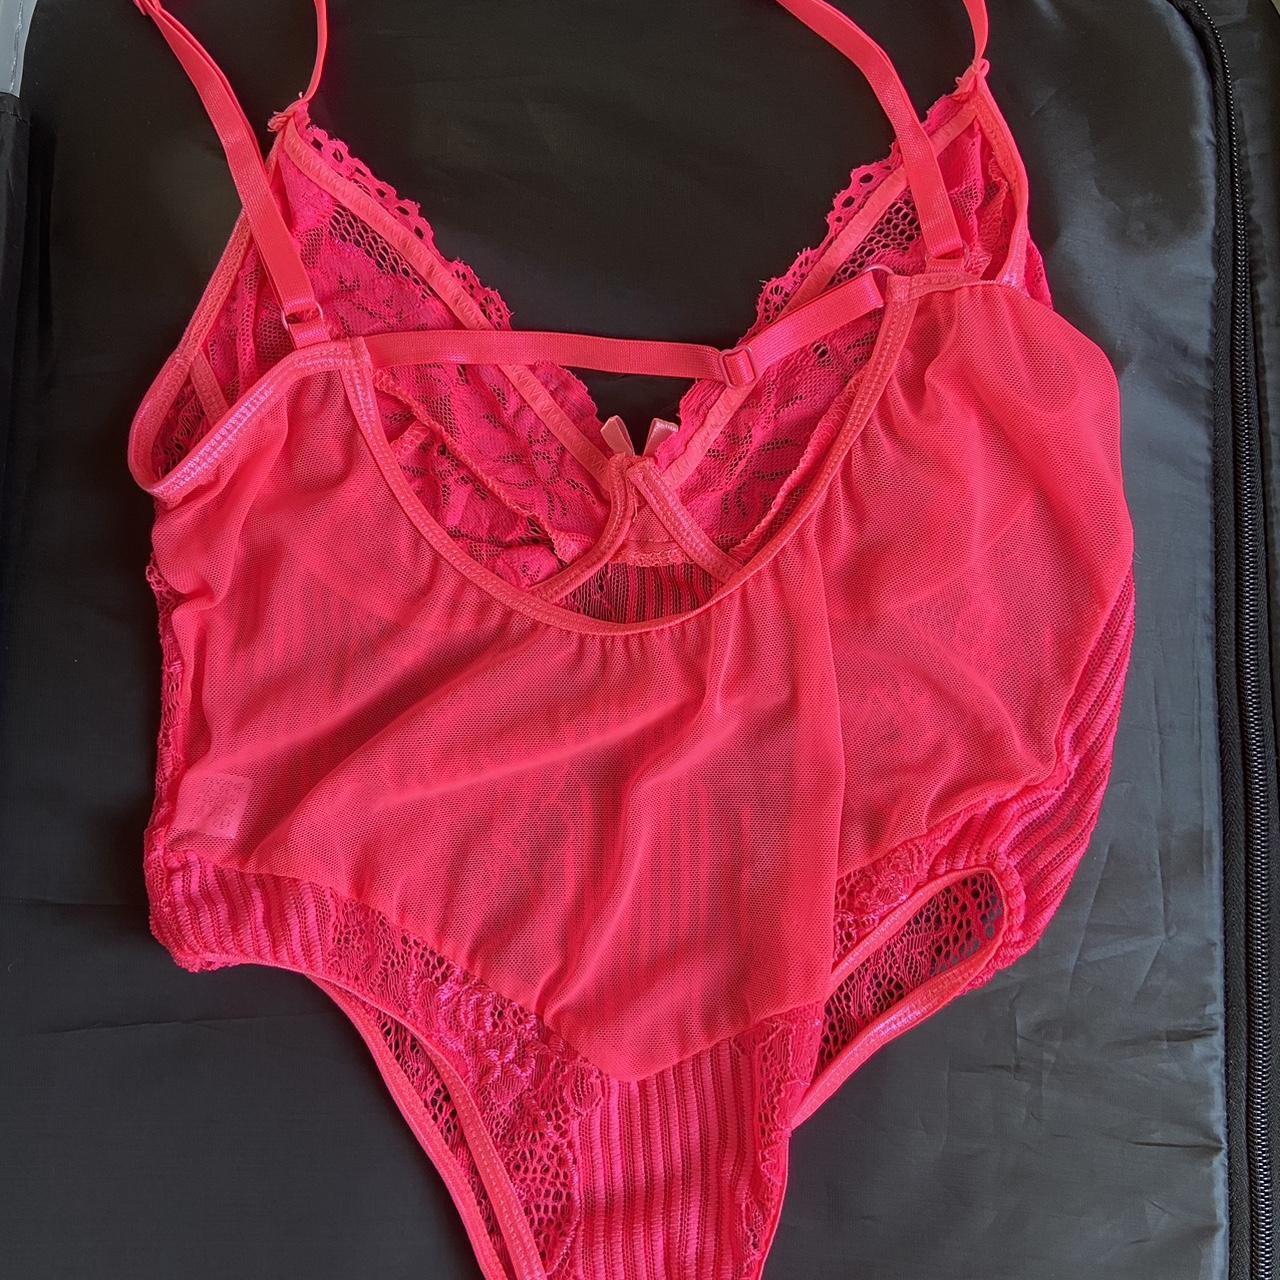 Neon pink lace bodysuit Never worn Stretchy - Depop